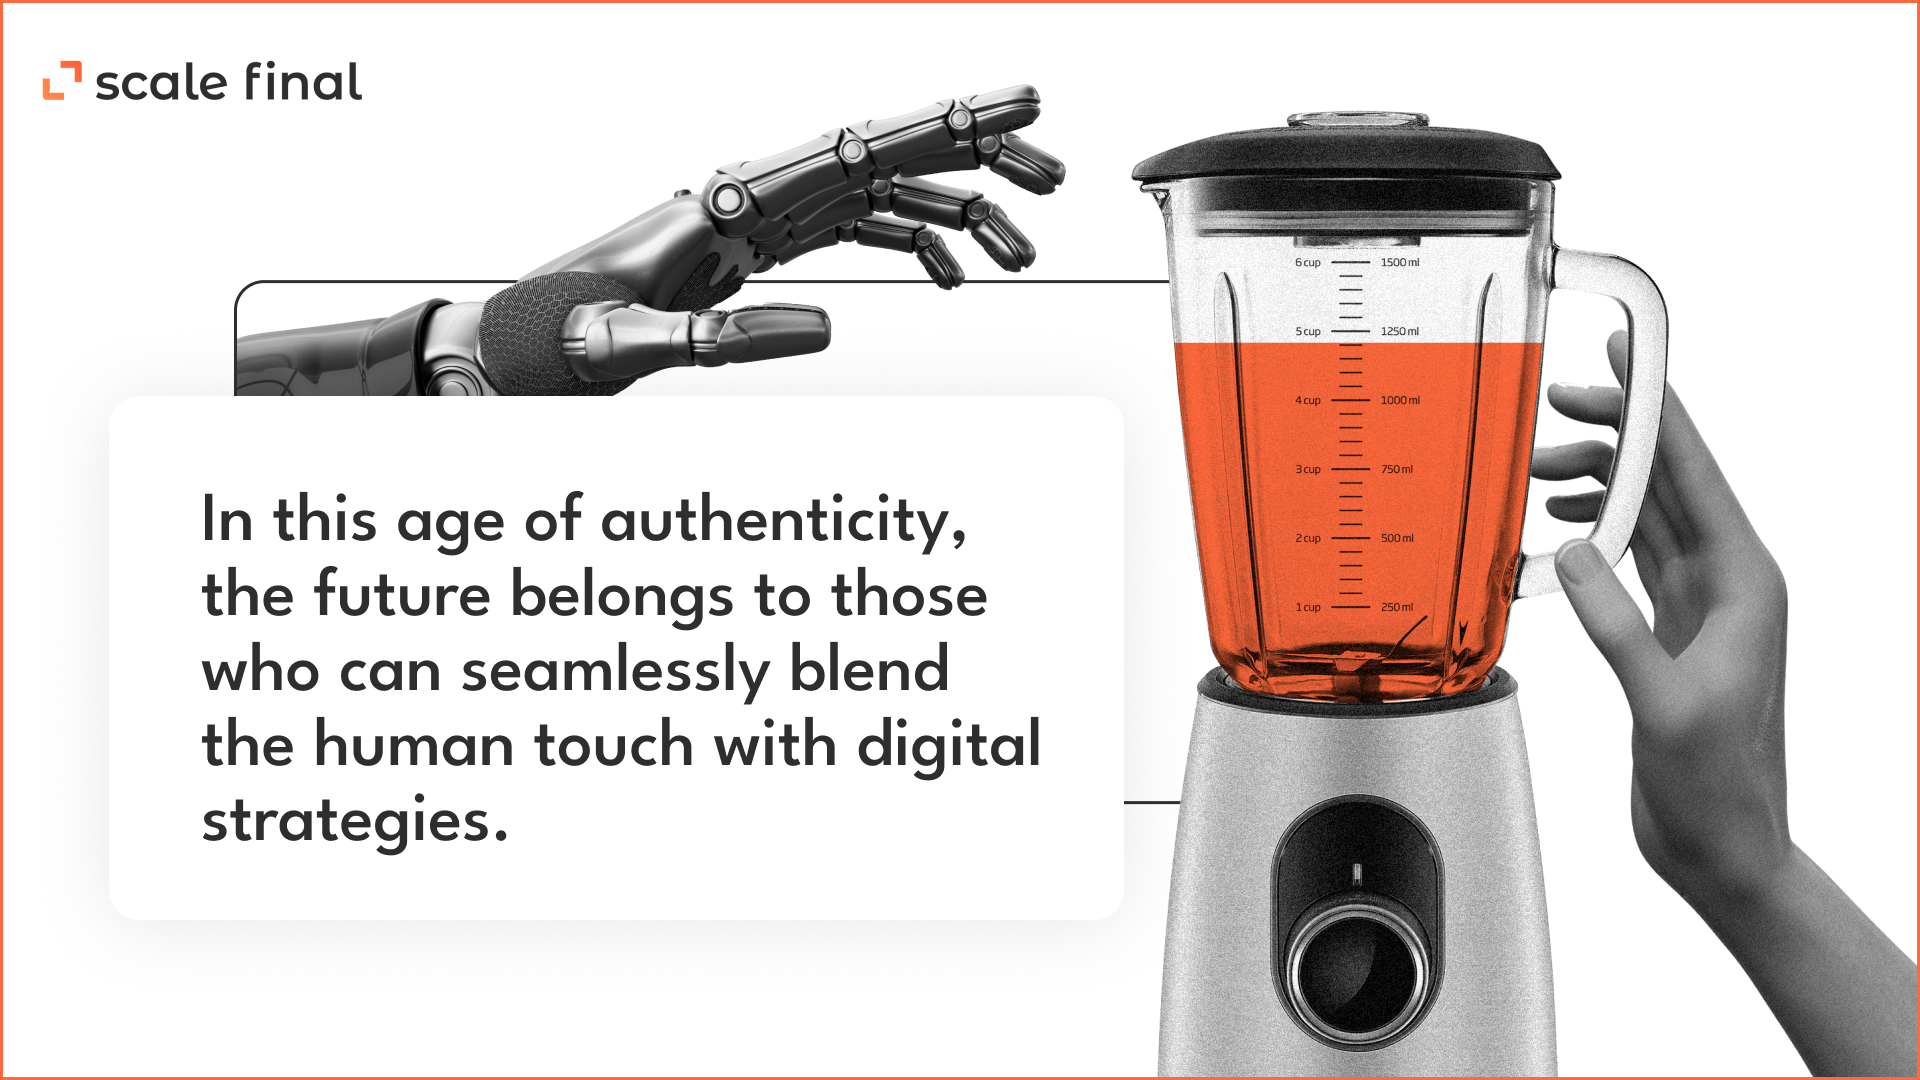 In this age of authenticity, the future belongs to those who can seamlessly blend the human touch with digital strategies.